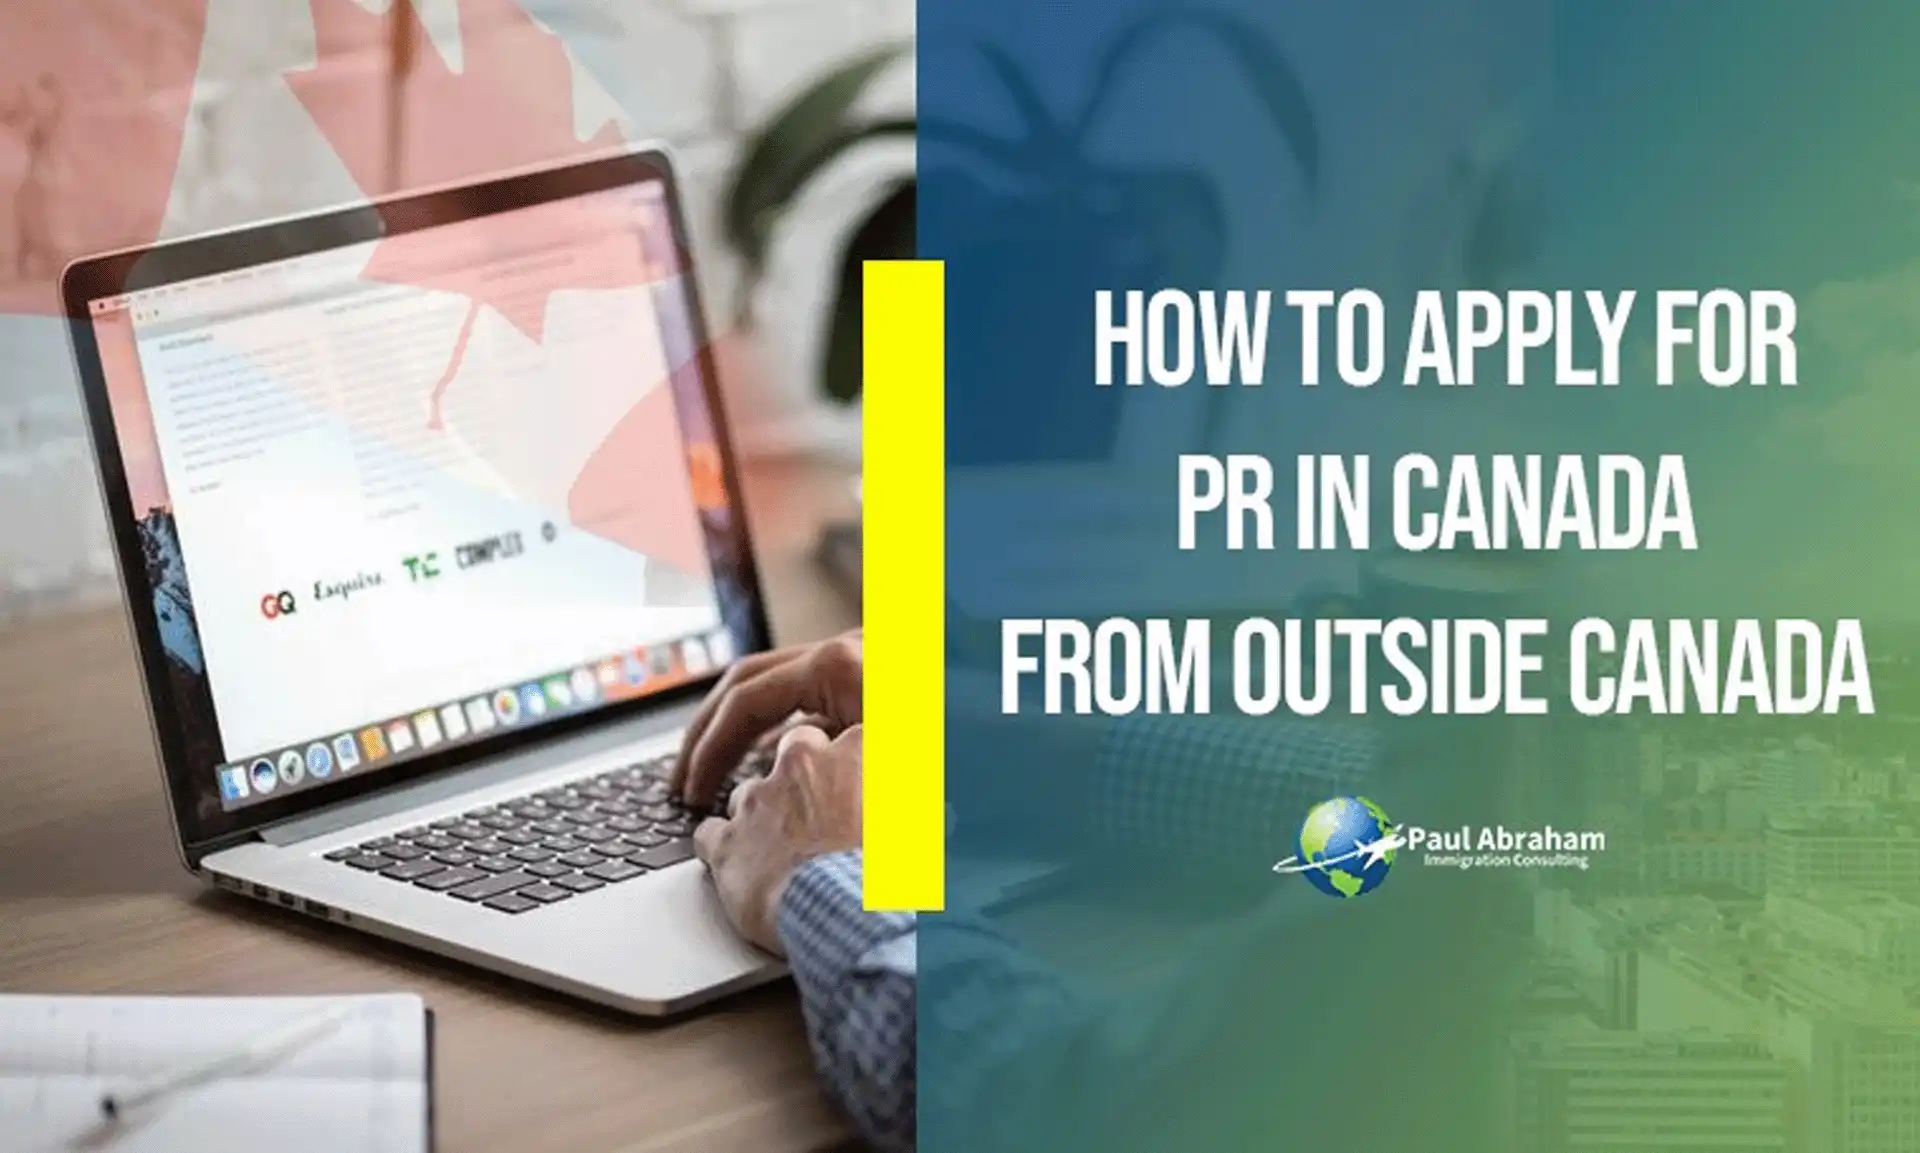 the image is of blog which describe how to apply for PR in Canada 